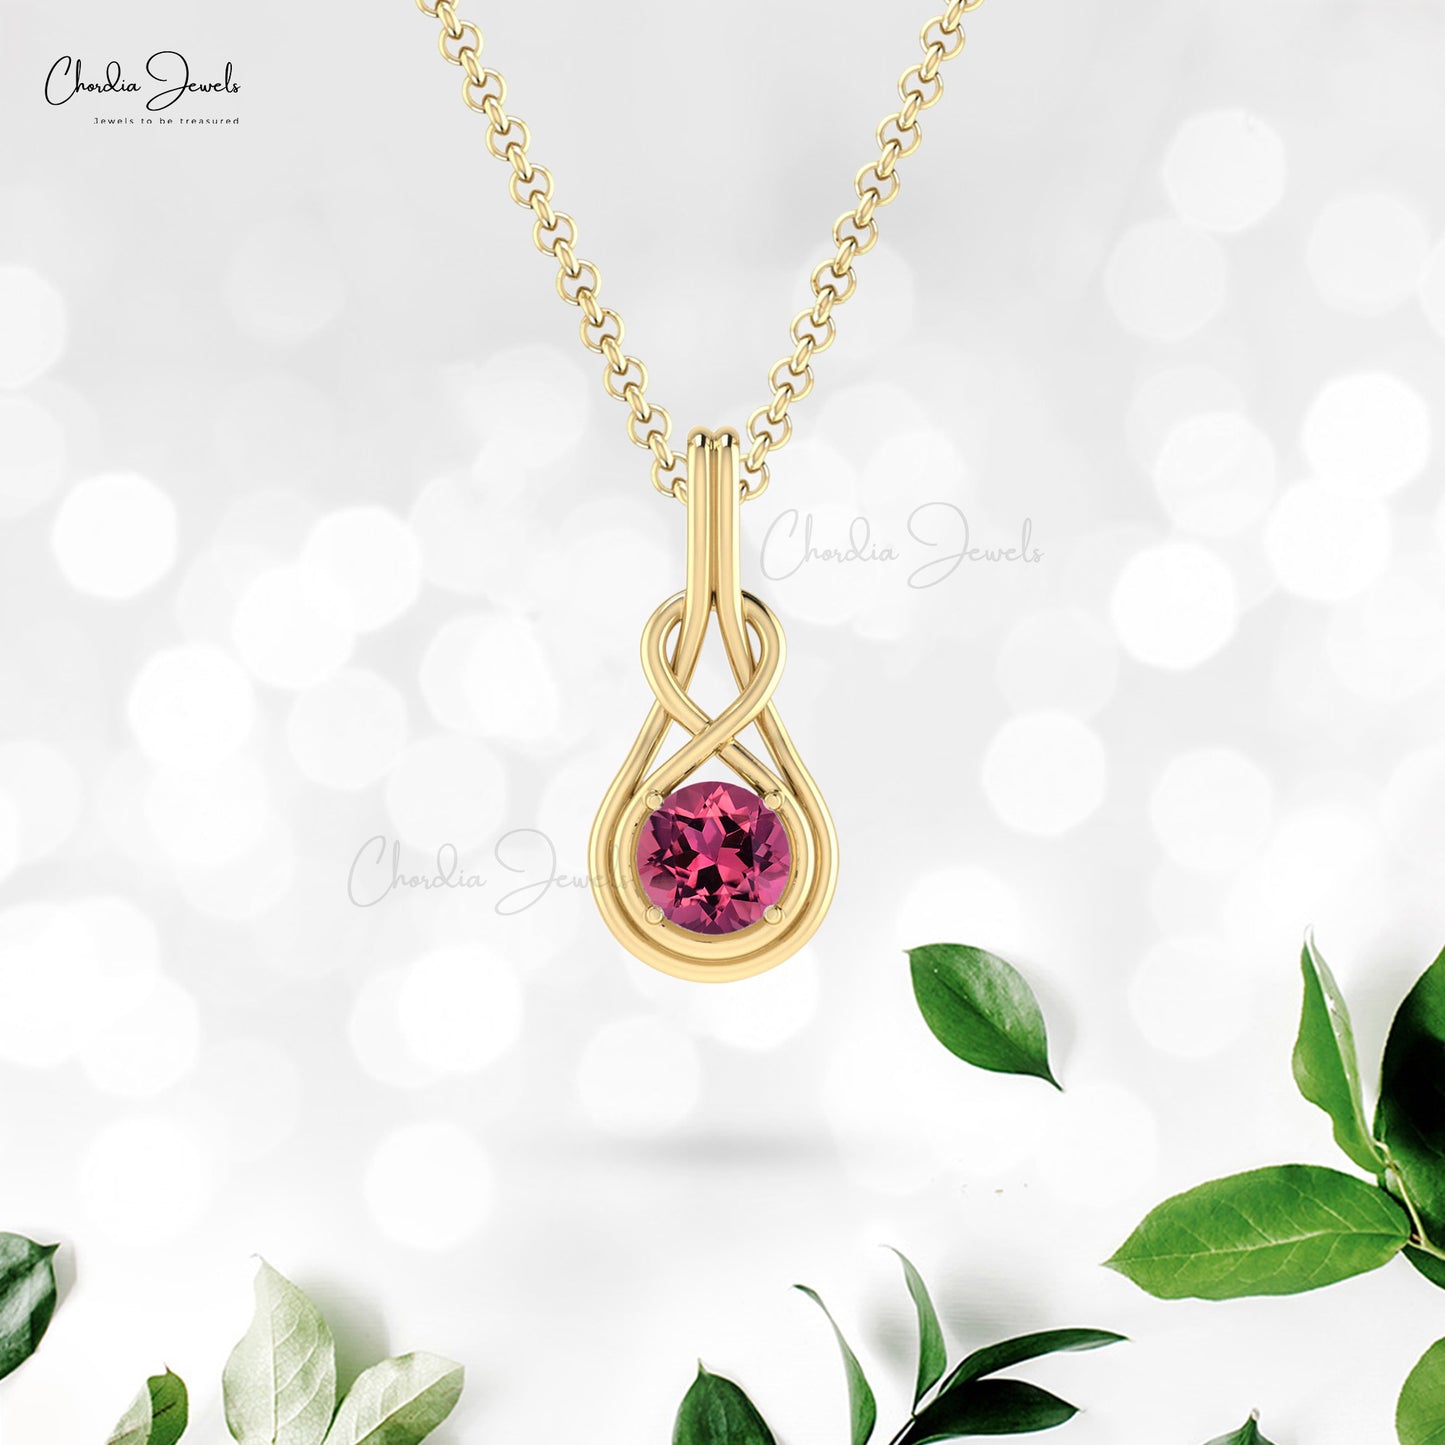 October Birthstone Natural Pink Tourmaline Solitaire Pendant Brilliant Round Cut 6mm Gemstone Pendant 14k Solid Gold Pendant For Women's